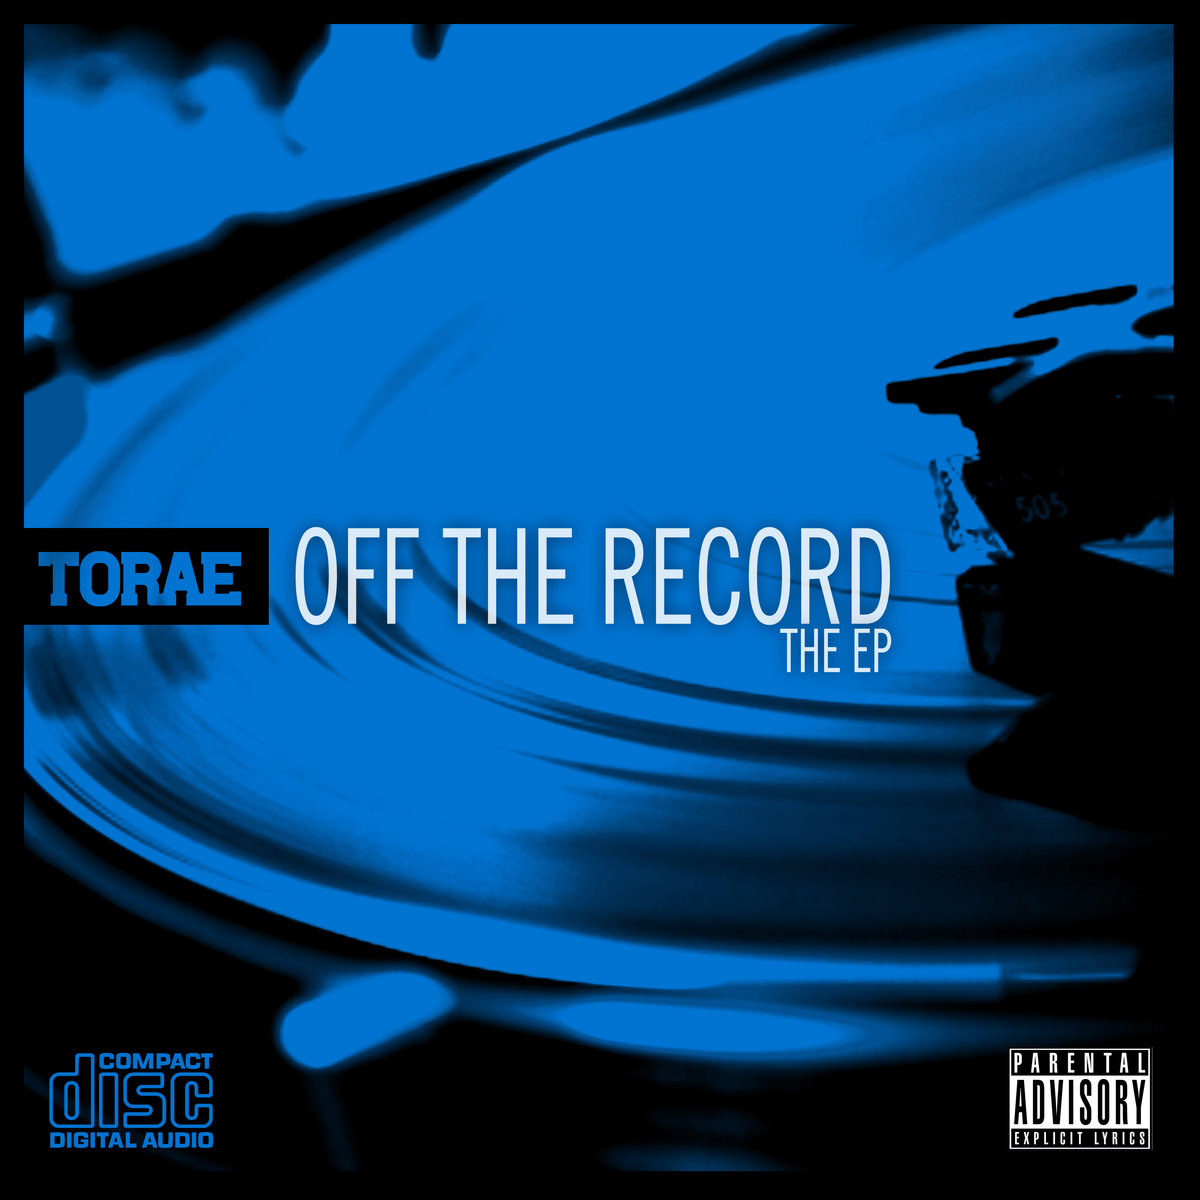 Off_the_record_the_ep